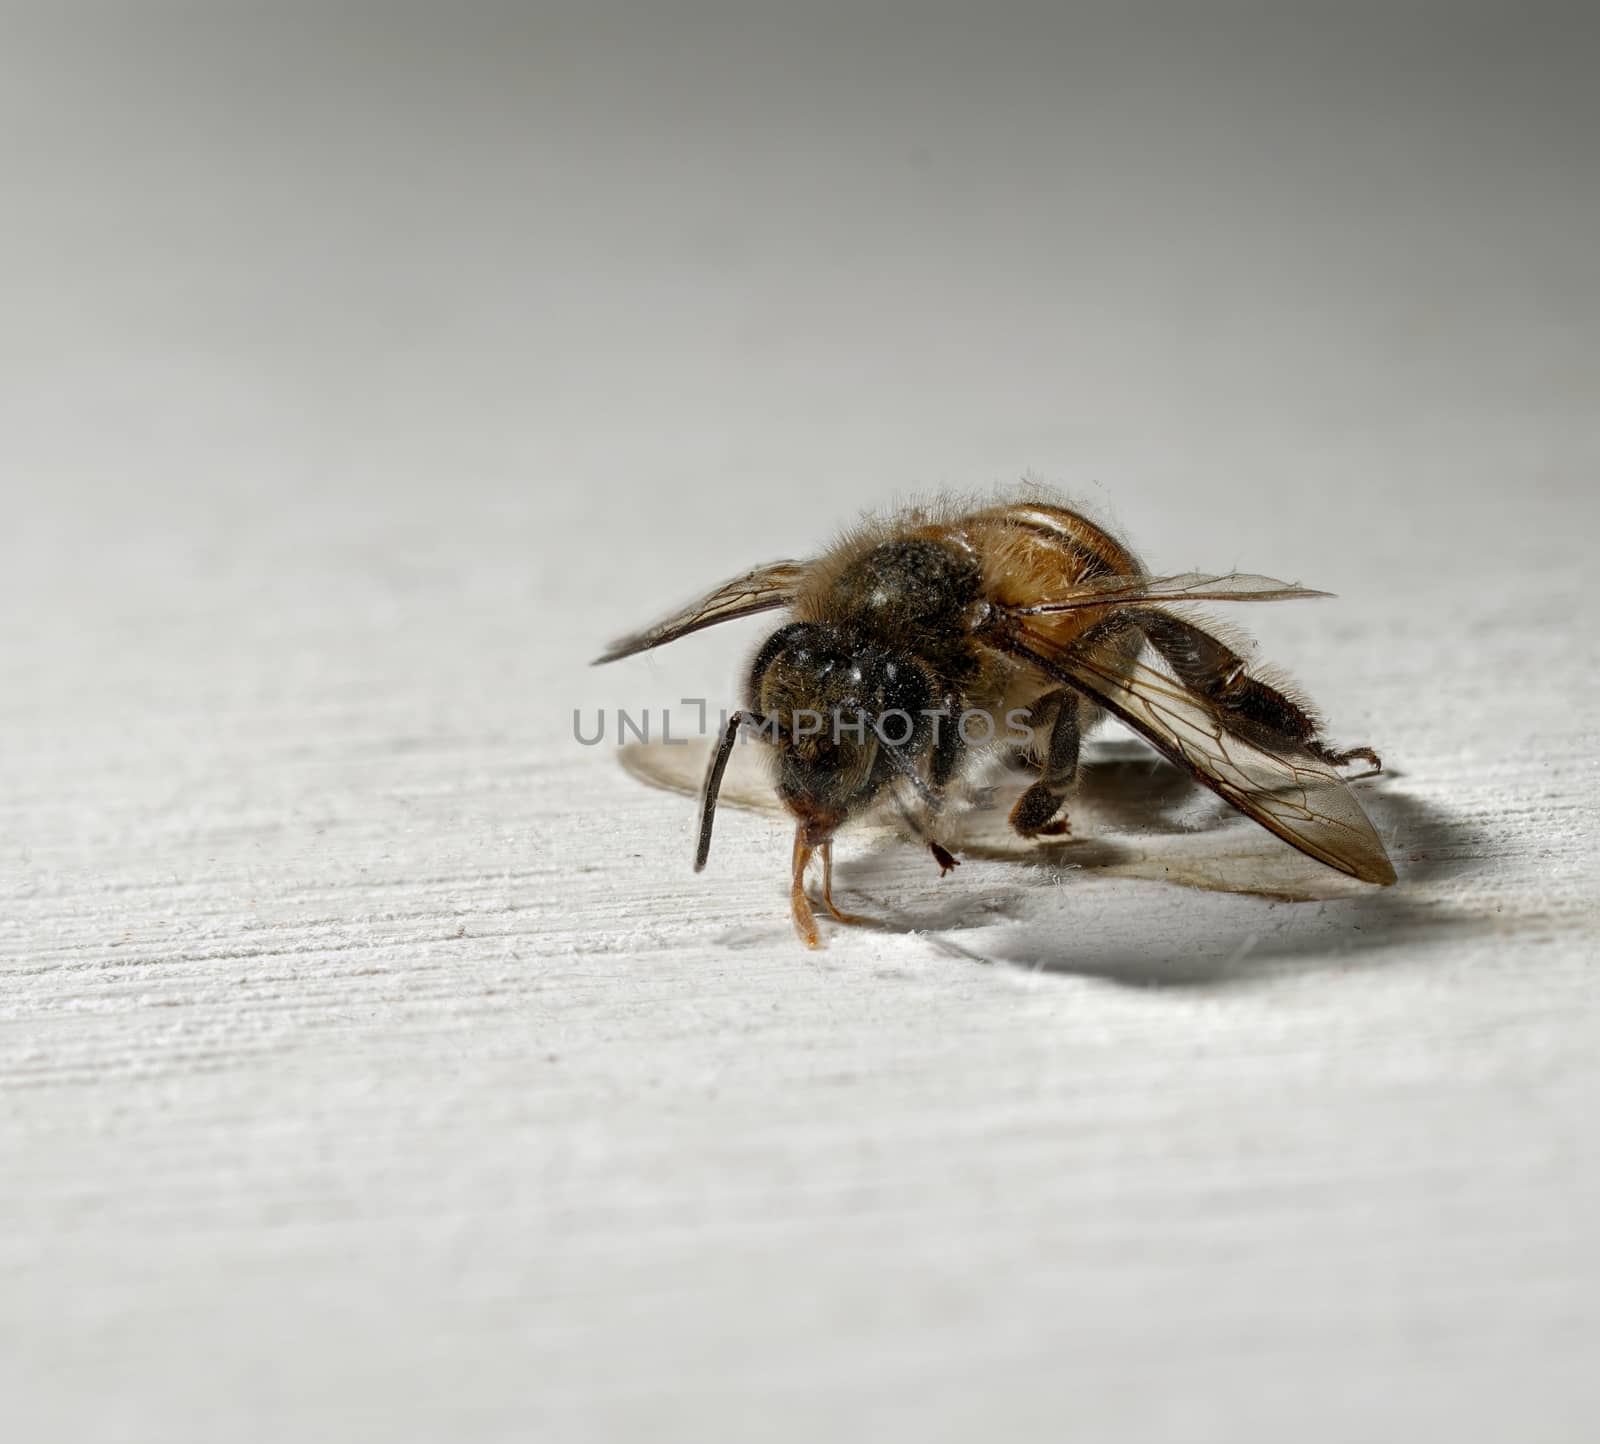 A close up of one worker bee on a white wooden background.